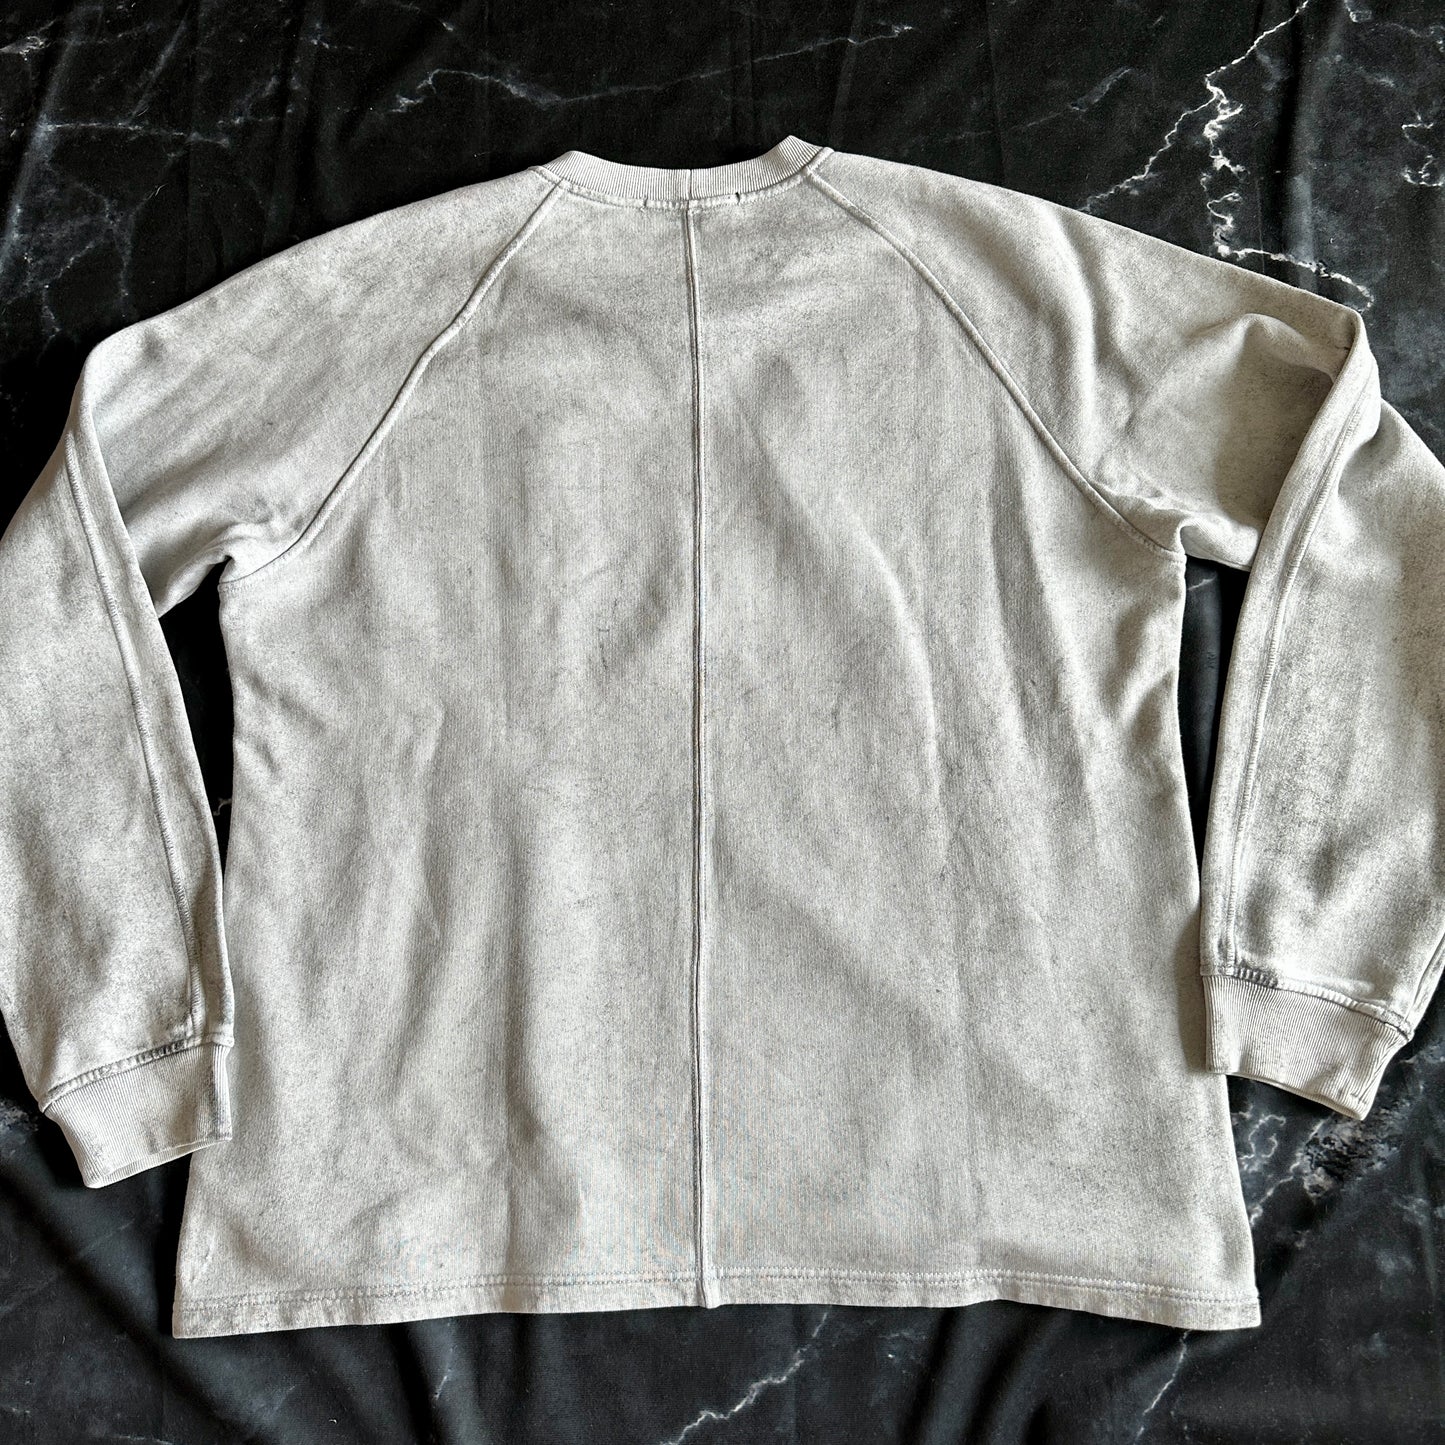 Stone Island Shadow Project Fallout Colour Treatment 2016 Sweatshirt - XL - Made in Italy